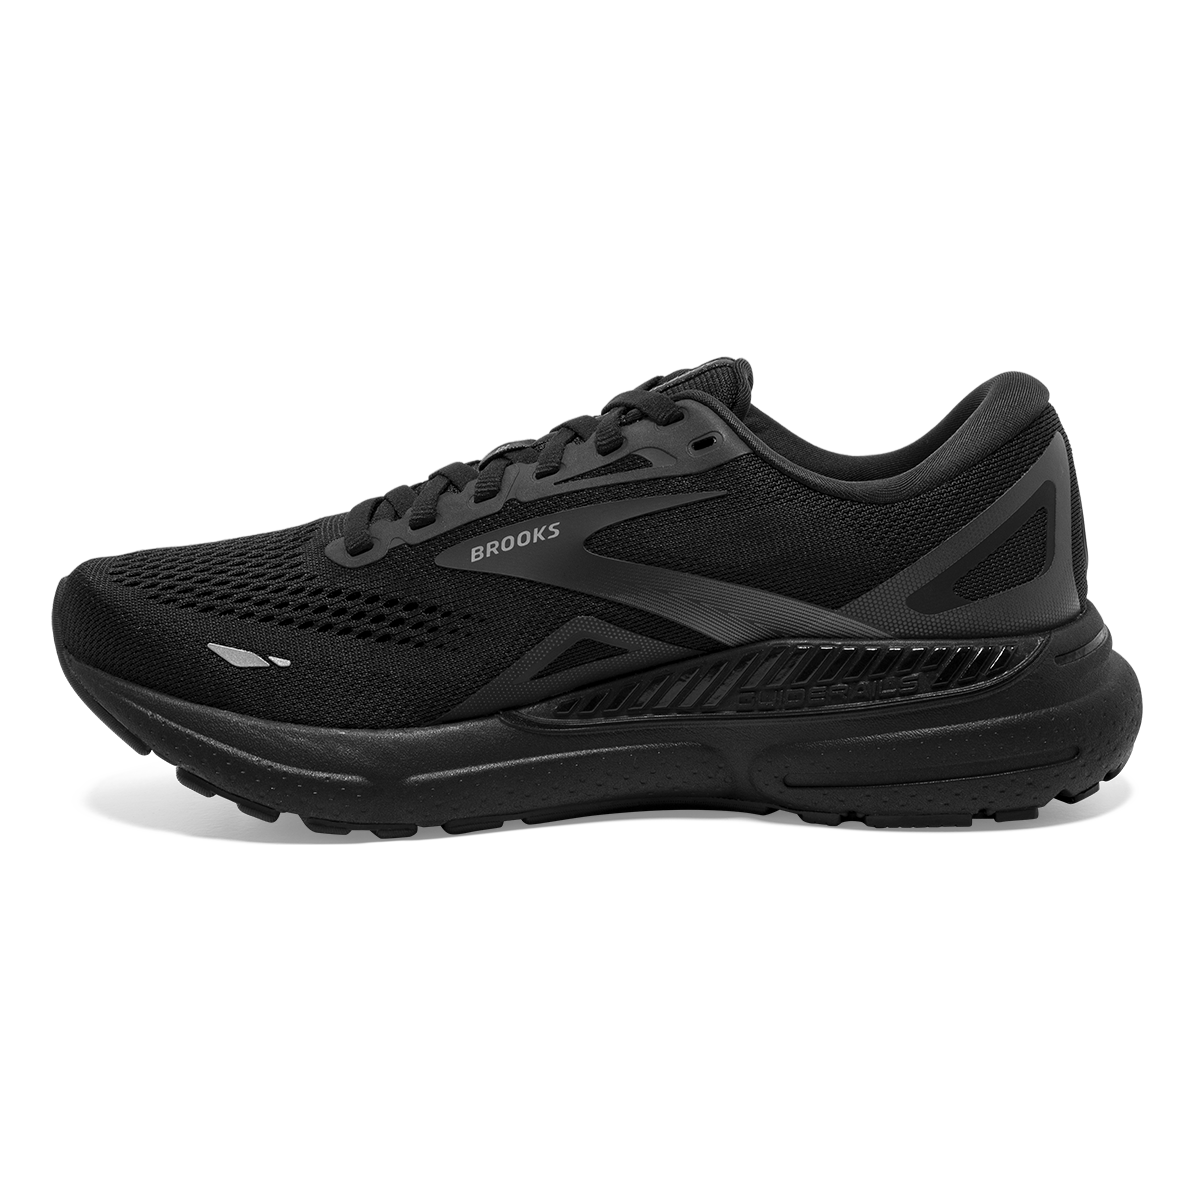 Medial view of the Men's Adrenaline GTS 23 in the wide 2E width, color Black/Black/Ebony